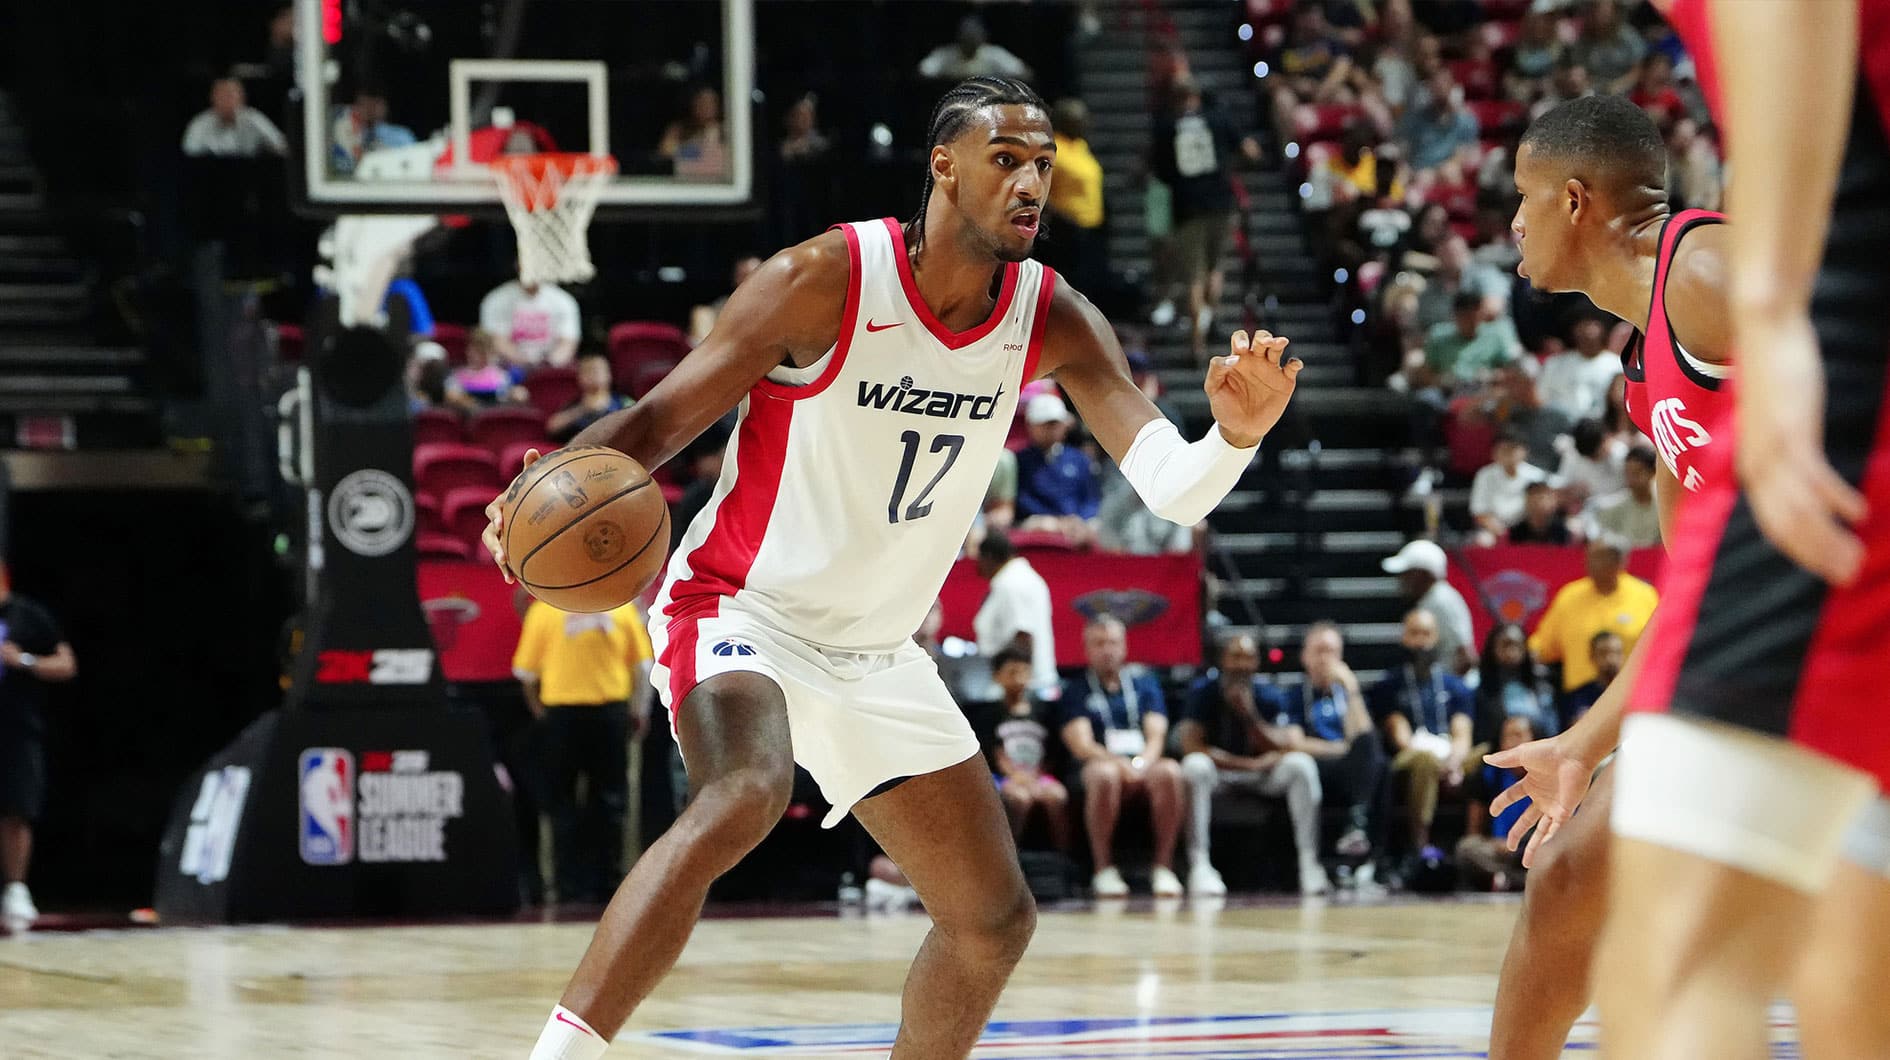 Washington Wizards forward Alex Sarr (12) dribbles against the Houston Rockets during the first quarter at Thomas & Mack Center. 